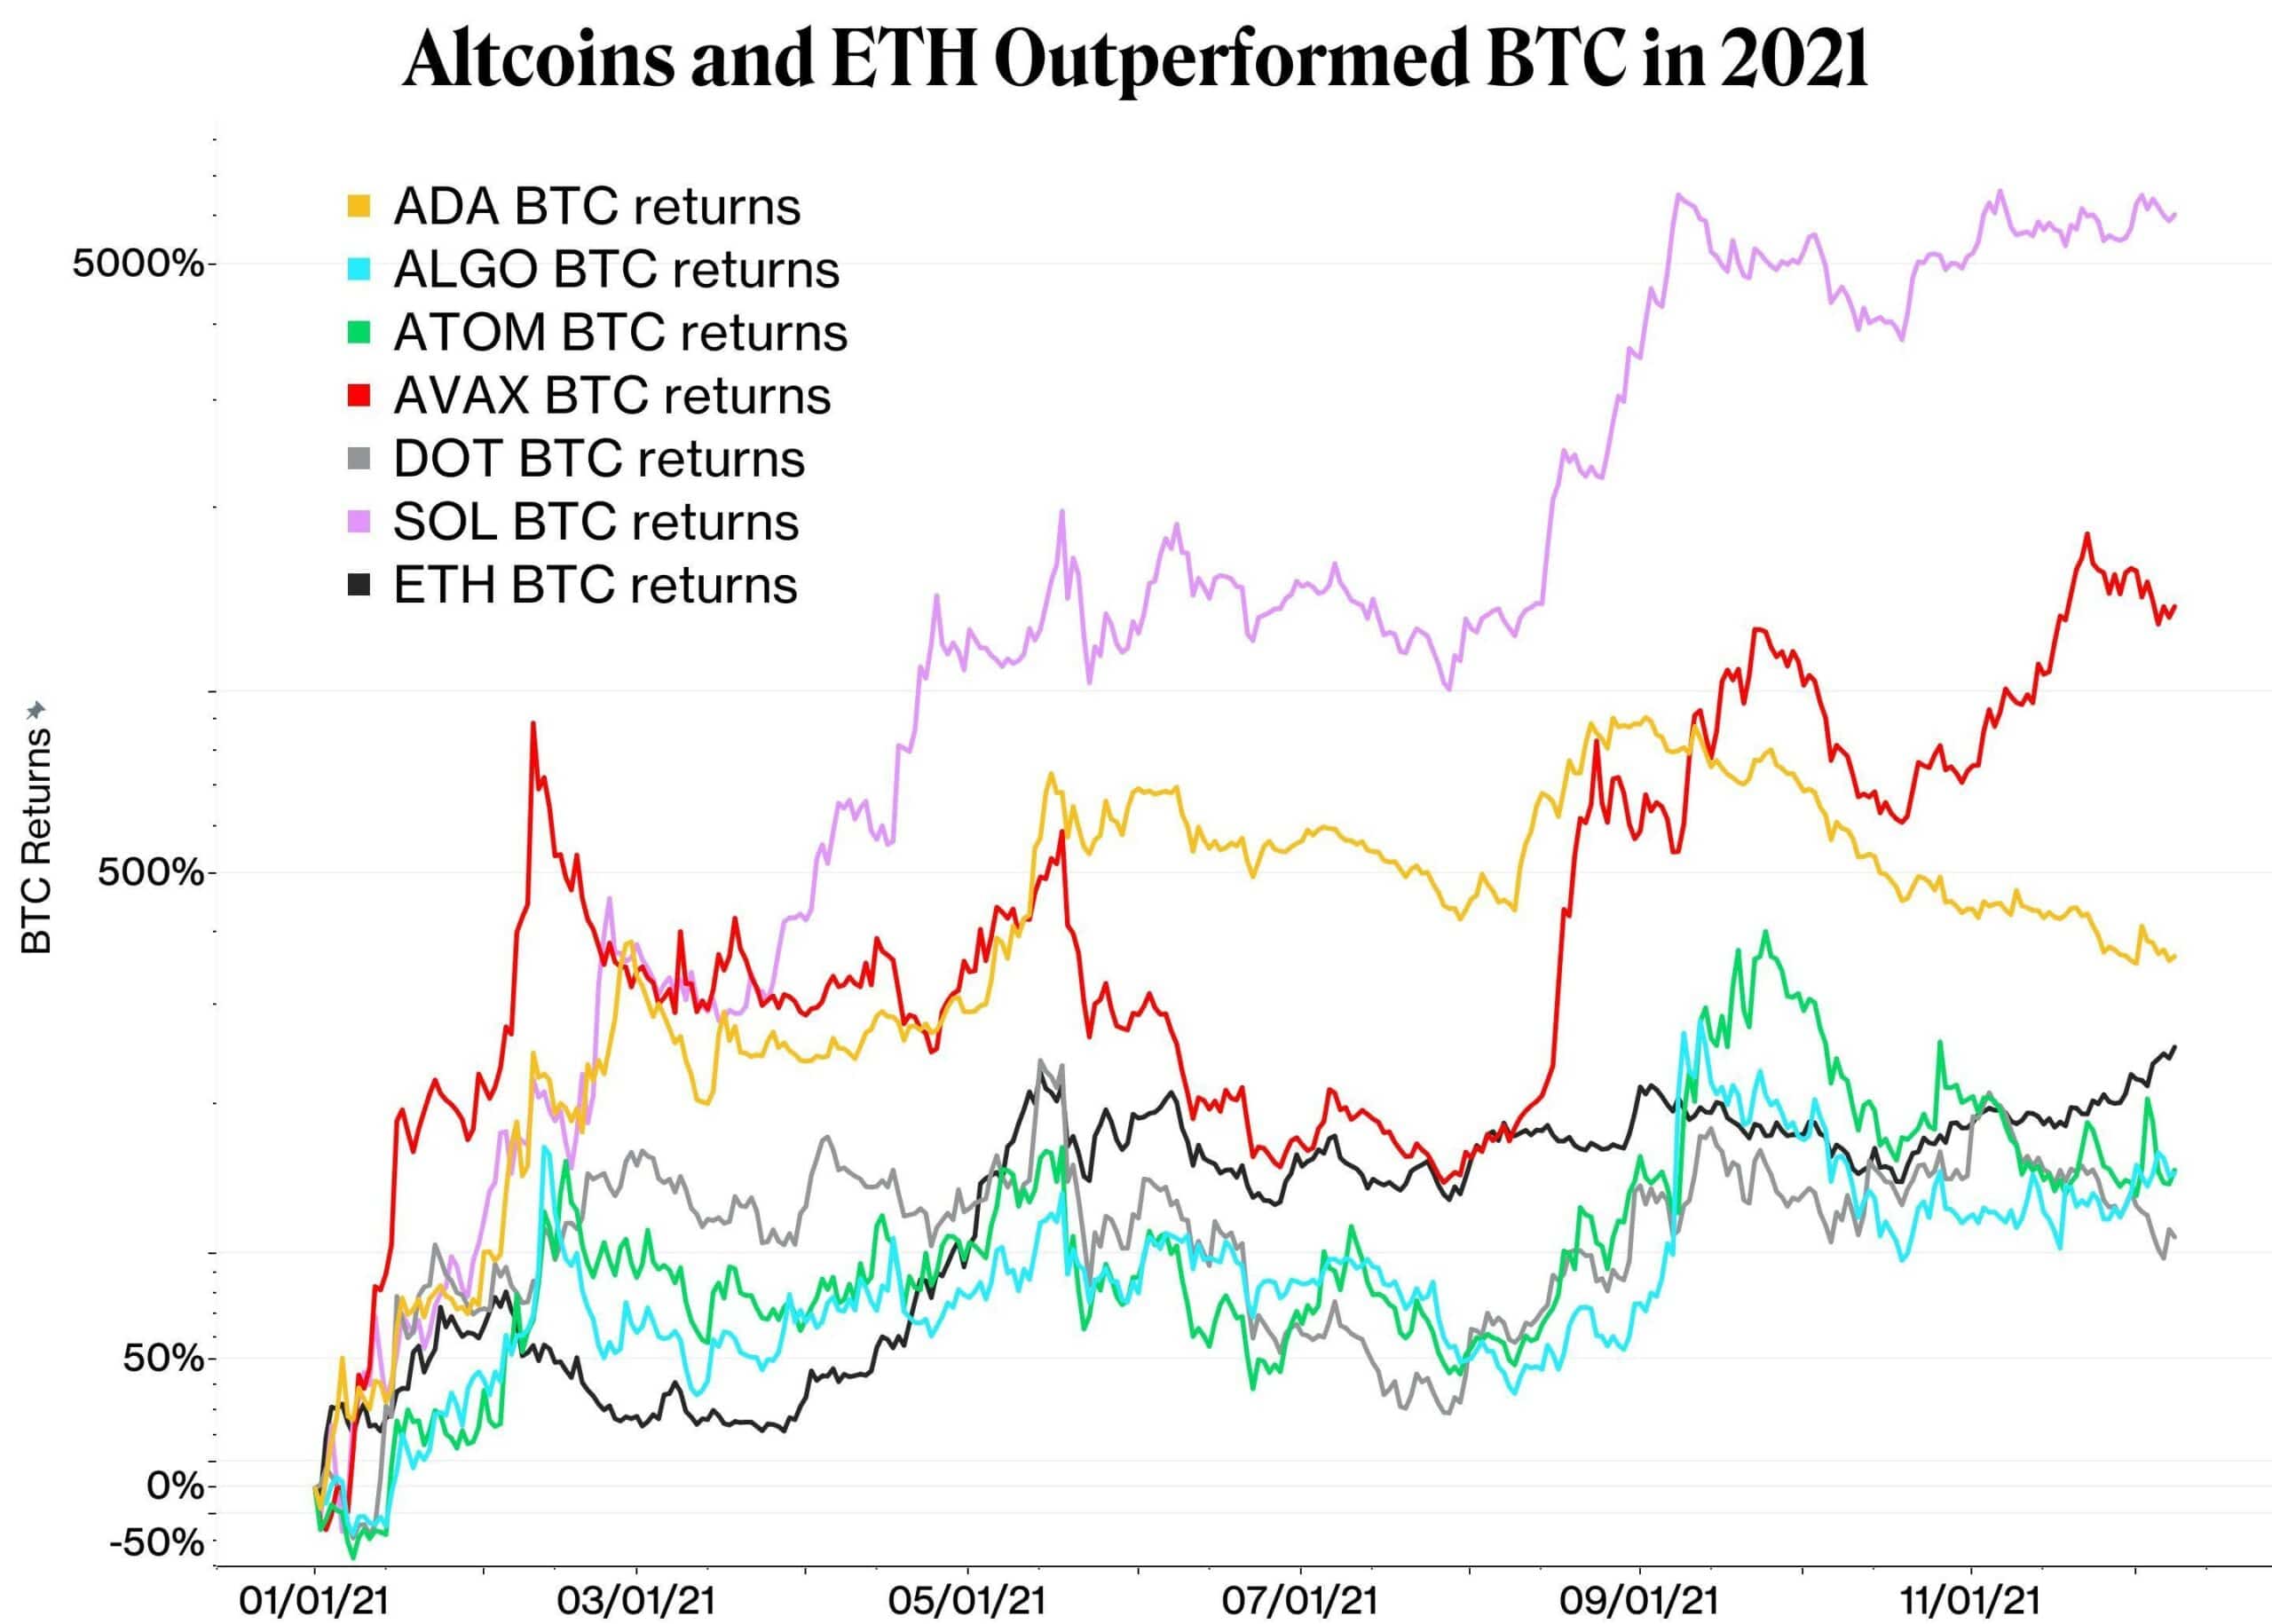 Altcoins and Ether year-to-date returns, price in bitcoin (logarithmic scale)